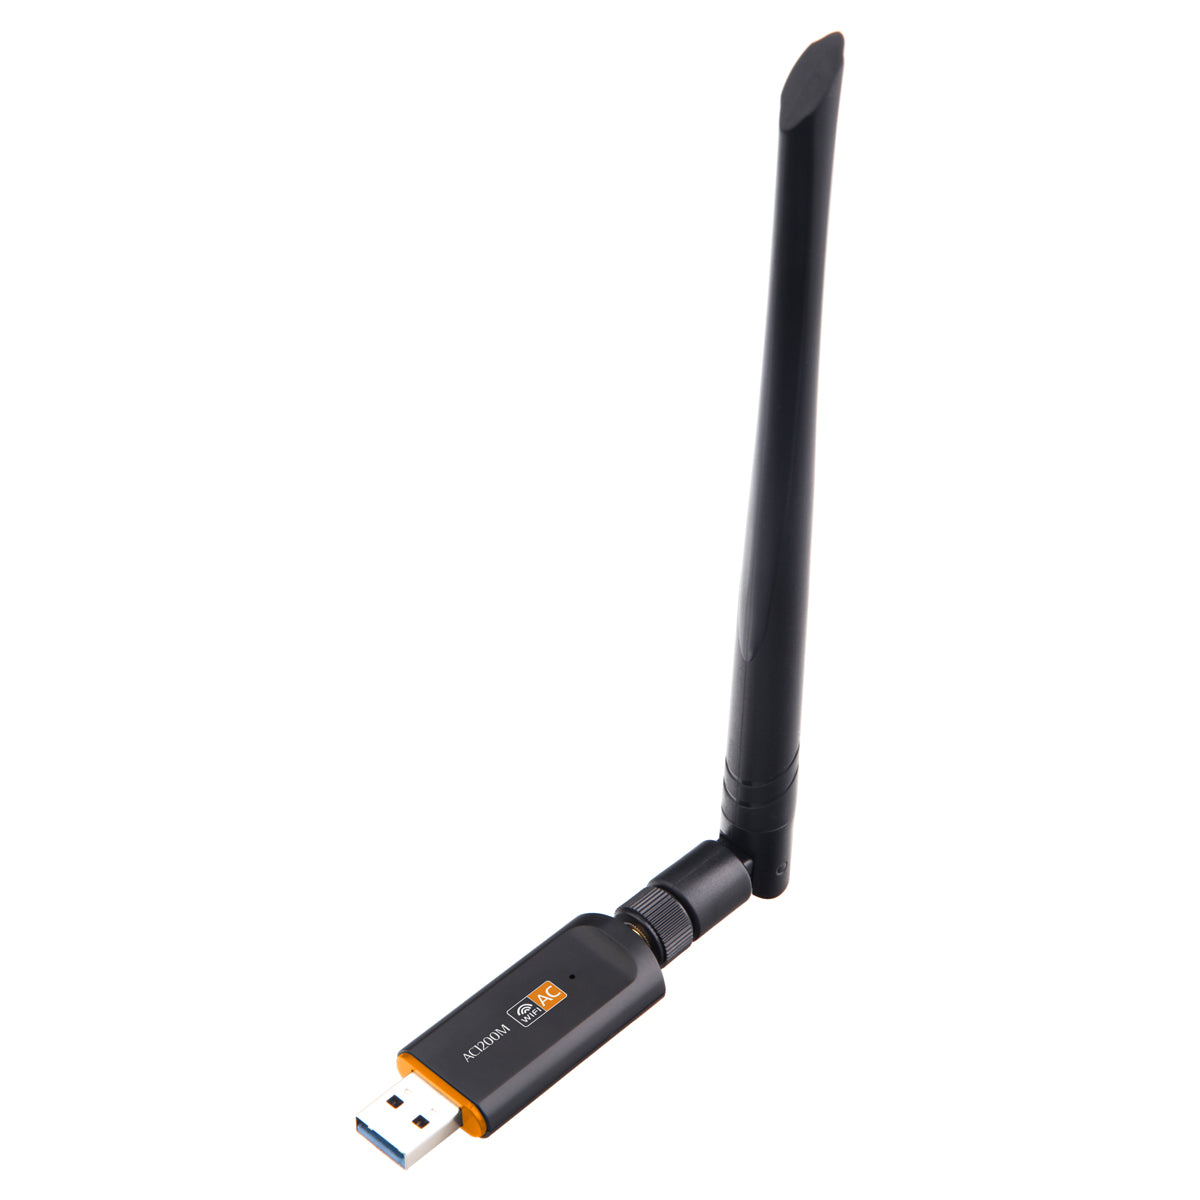 USB WiFi Adapter for Desktop PC, AC1200Mbps USB 3.0 WiFi Dual Band Network Adapter with 2.4GHz/5GHz High Gain Antenna, MU-MIMO, Windows 10/8.1/8/7/XP, Mac OS 10.9-10.15